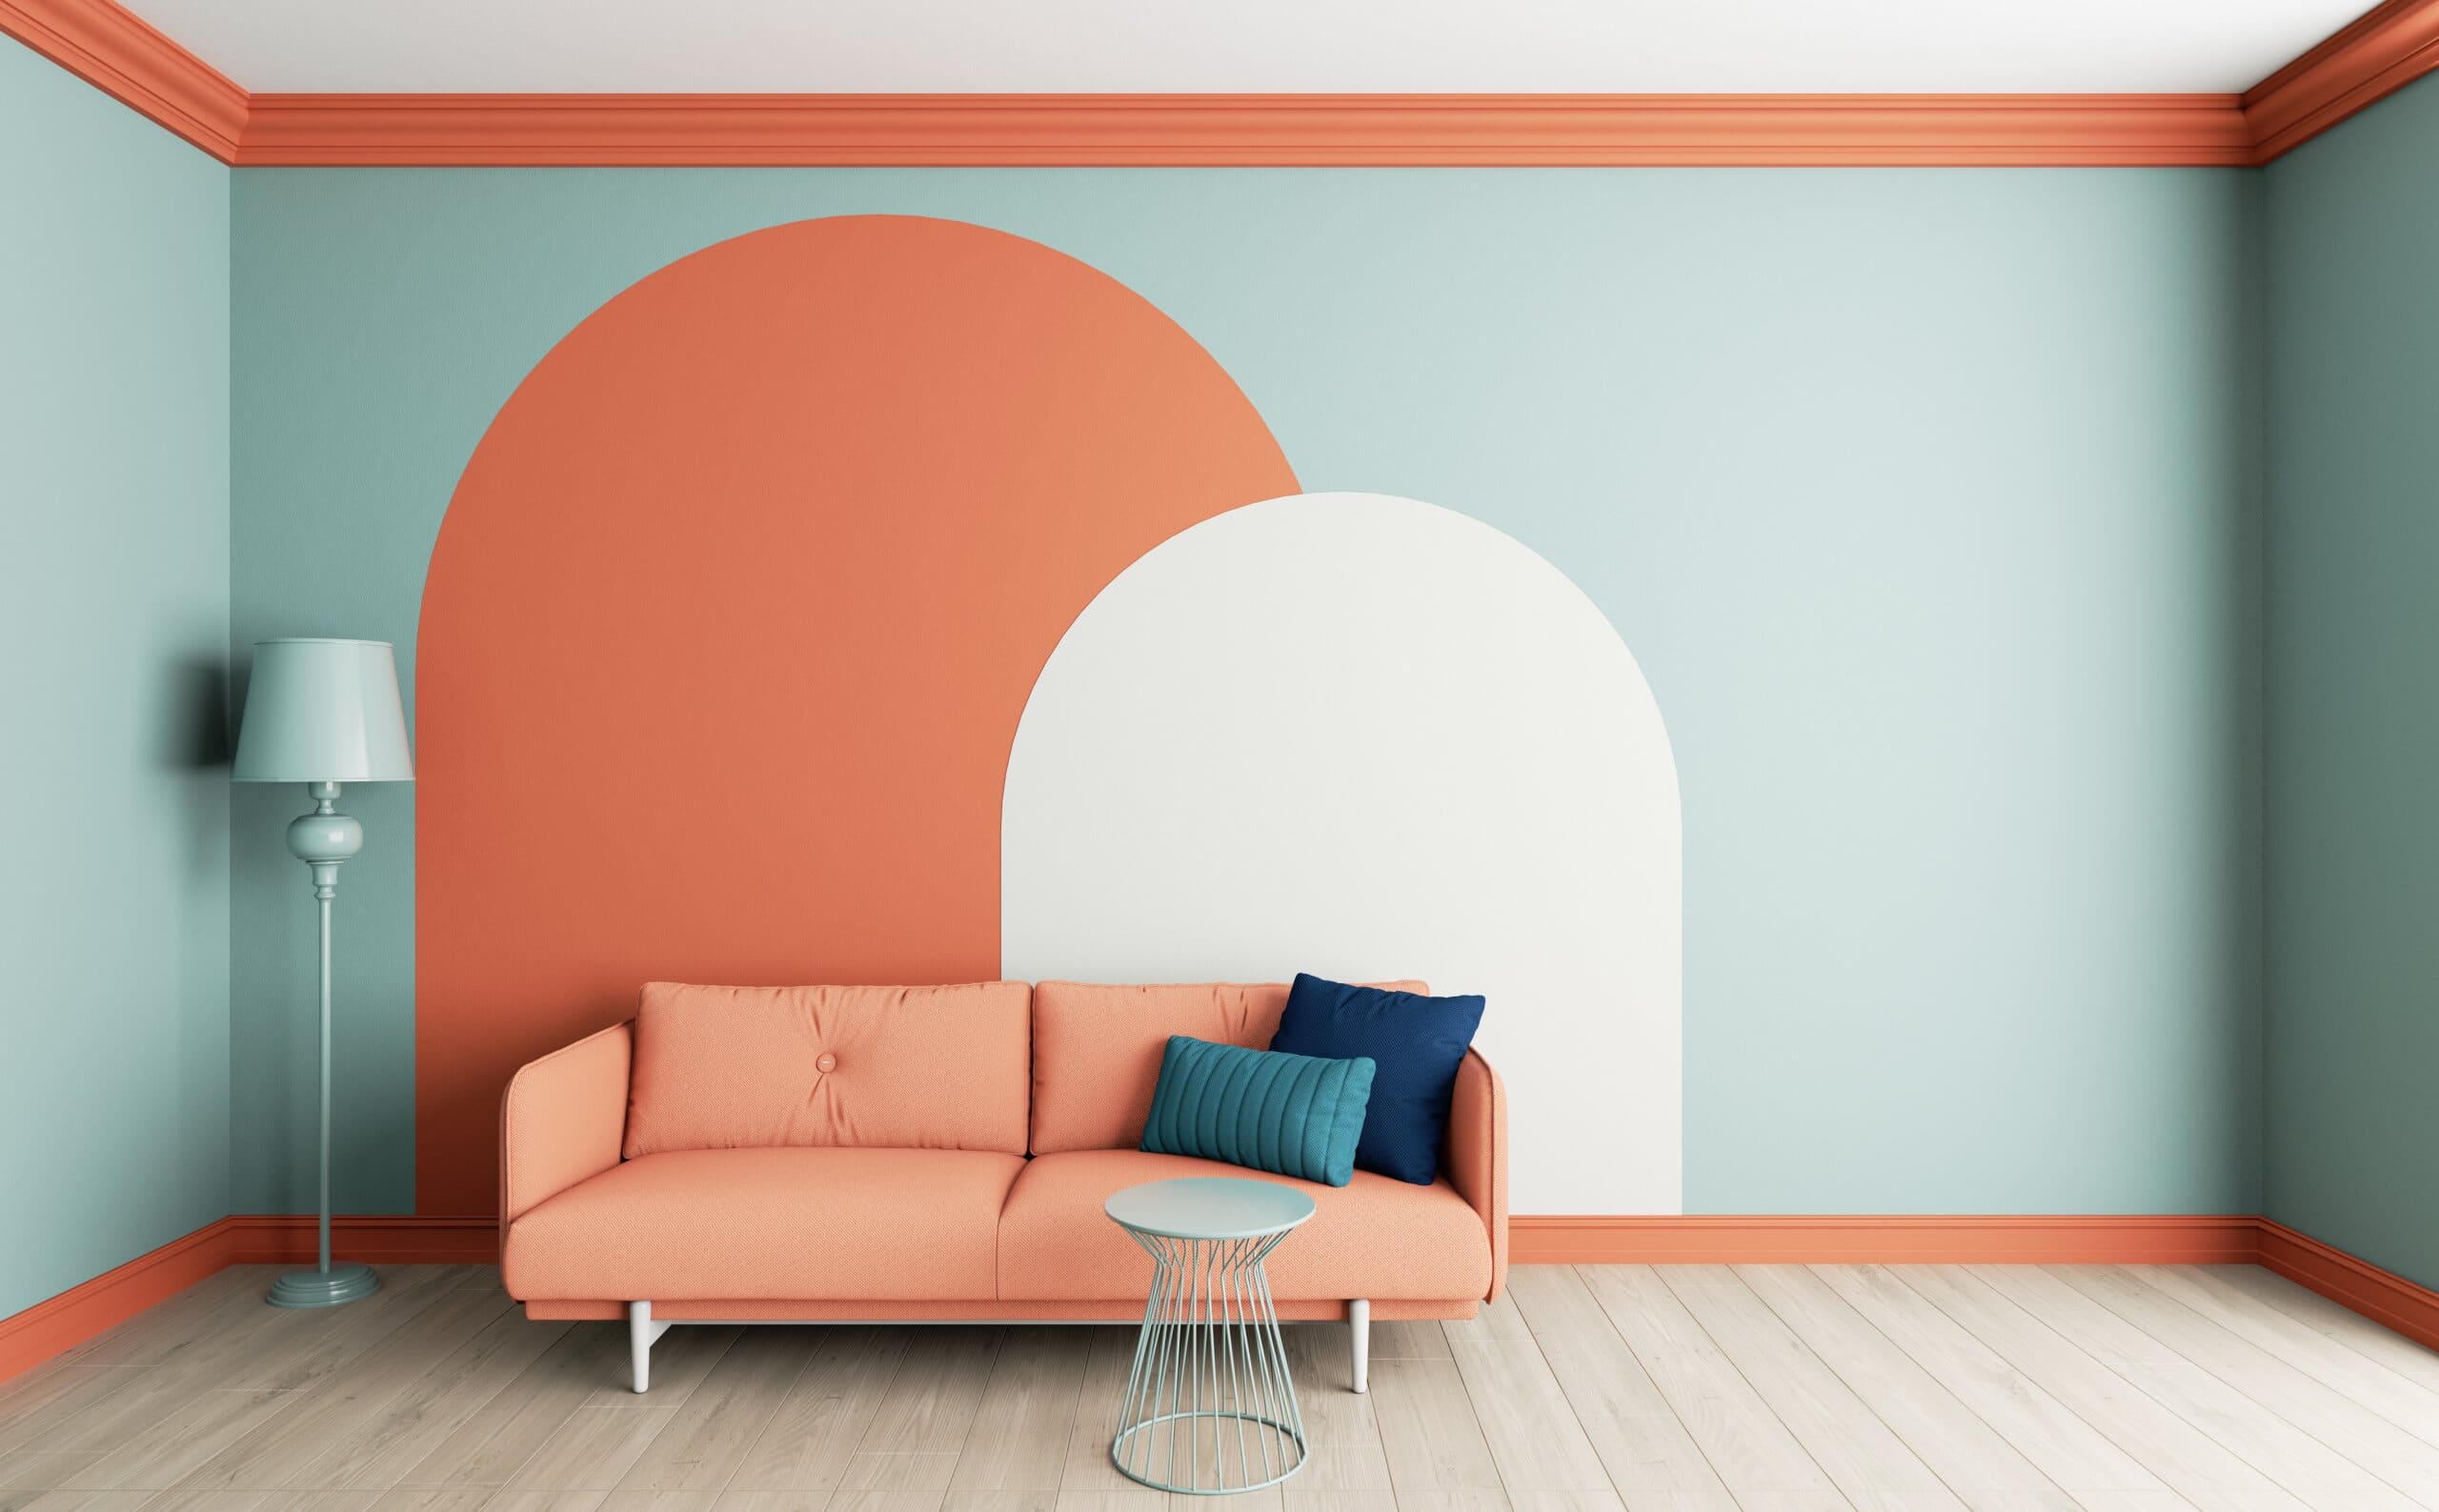 Living room with modern TikTok arch trend painted on wall in colour.